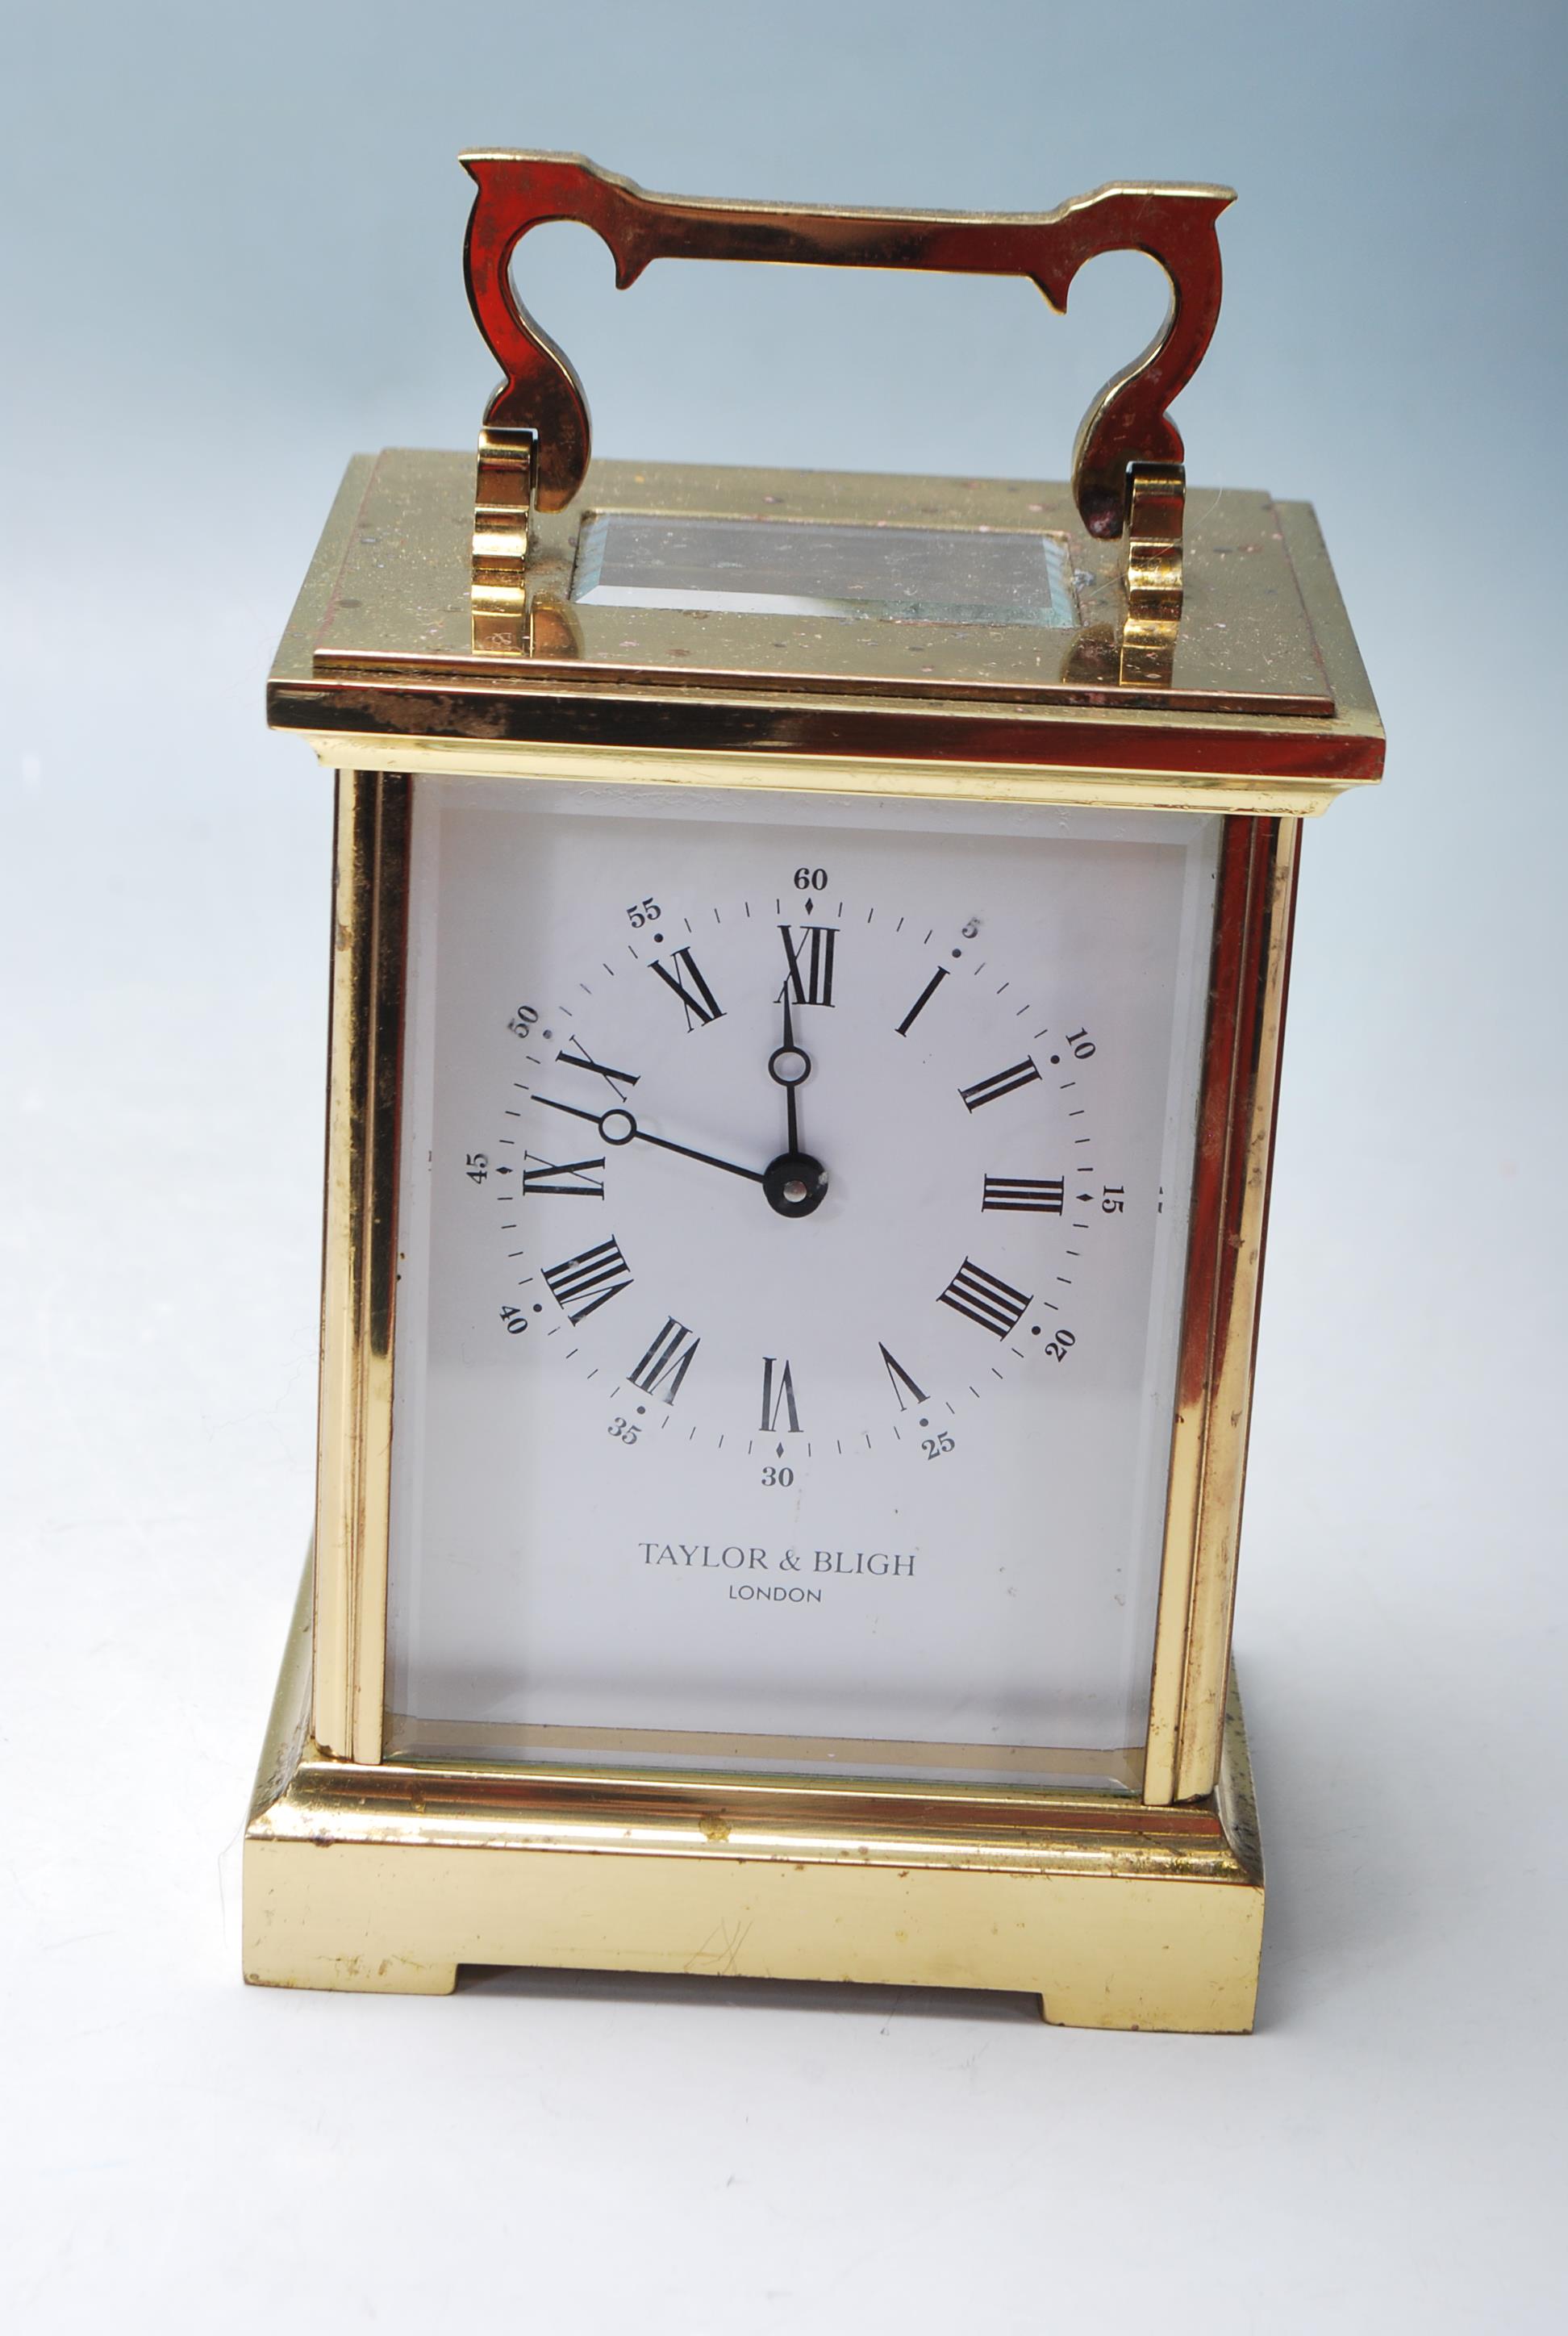 TAYLOR & BLIGH BRASS CASED CARRIAGE CLOCK